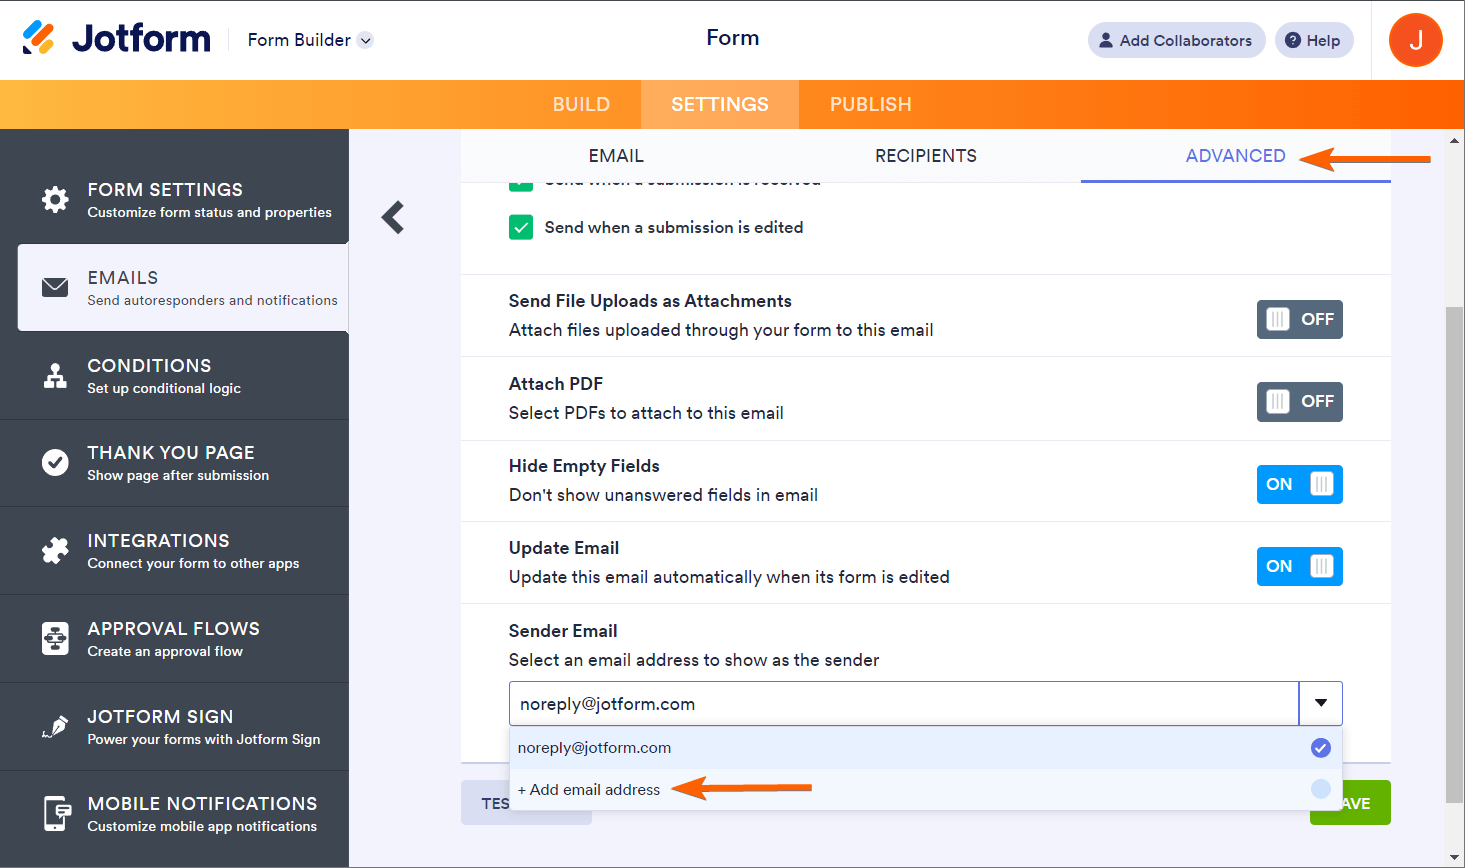 Add Email Address option in the notification email settings in Jotform Form Builder Screenshot 21